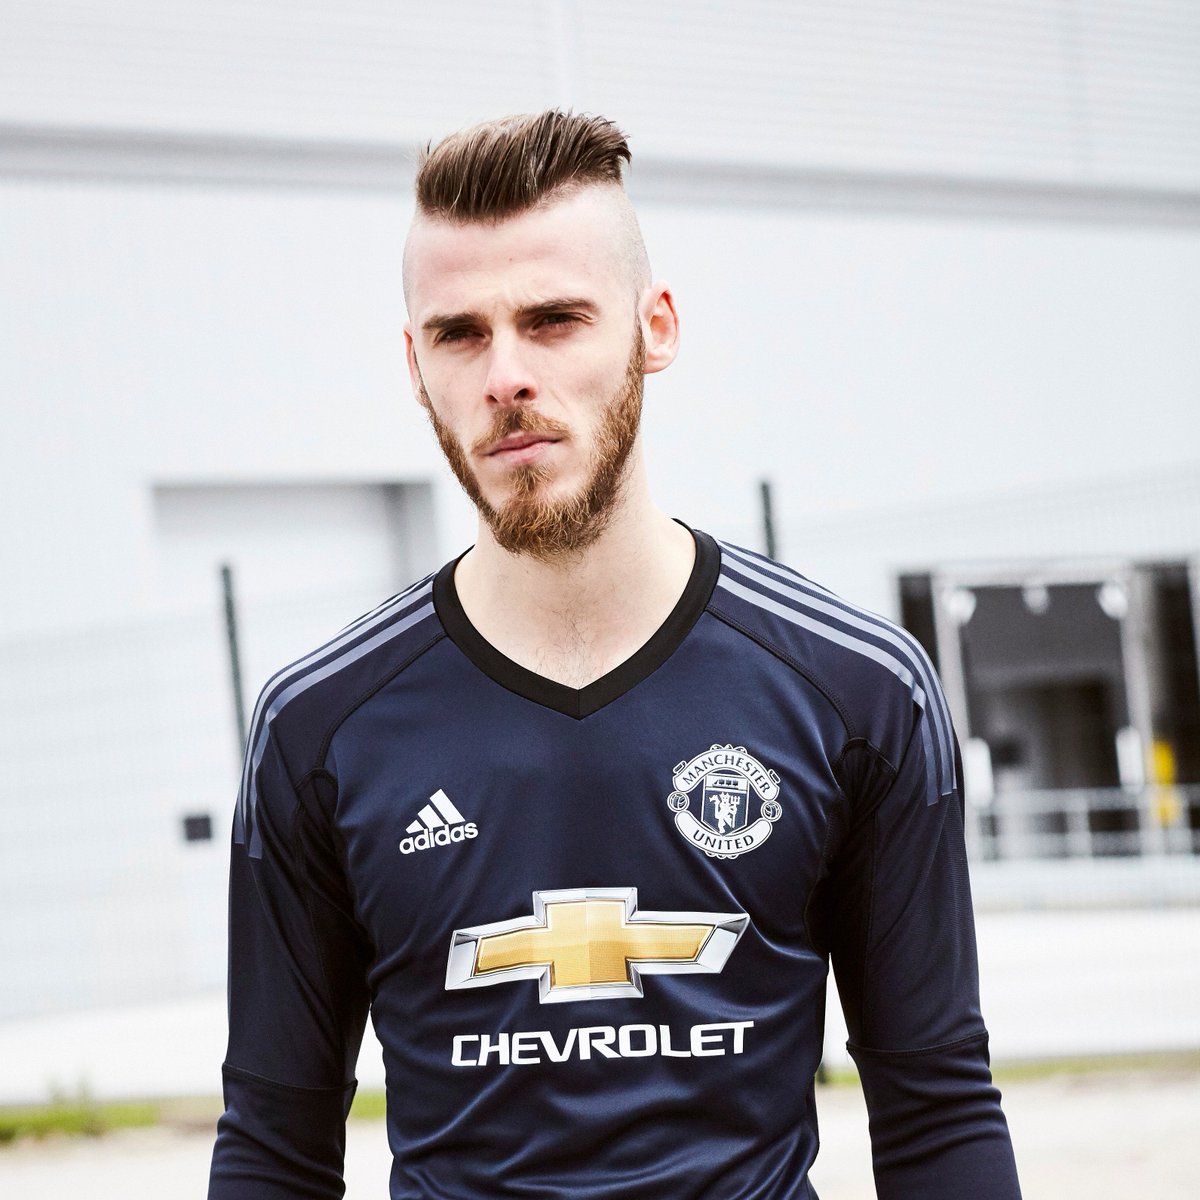 delicatesse inrichting getuige Manchester United on Twitter: "Ready for action. Our new 2017/18 home  goalkeeper kit. Get yours now: https://t.co/oBJKD8tVUr #HereToCreate  https://t.co/NnhrOUvWPK" / Twitter